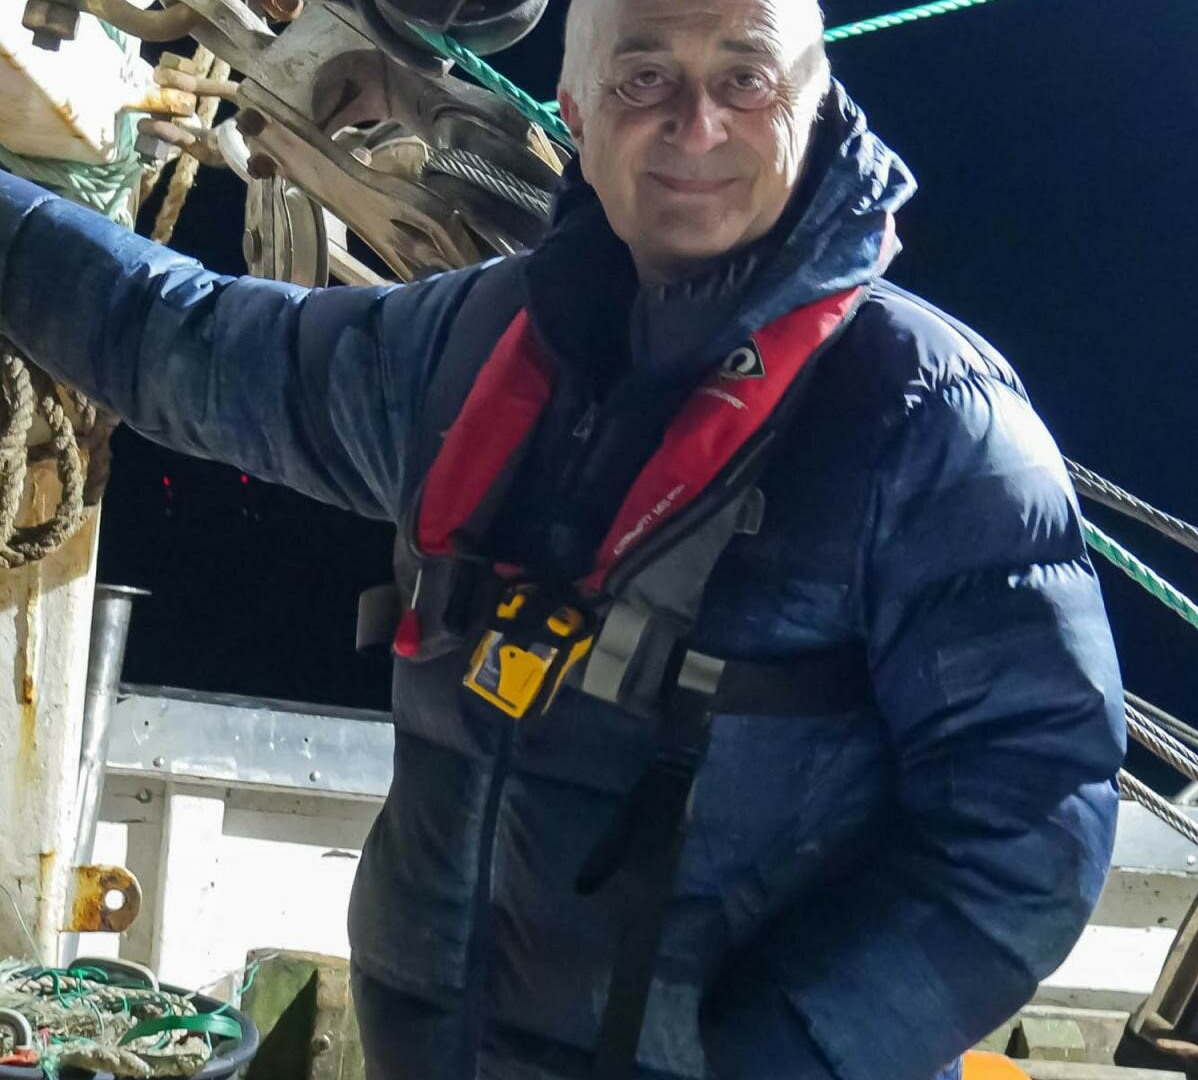 Show The Thames at Night with Tony Robinson